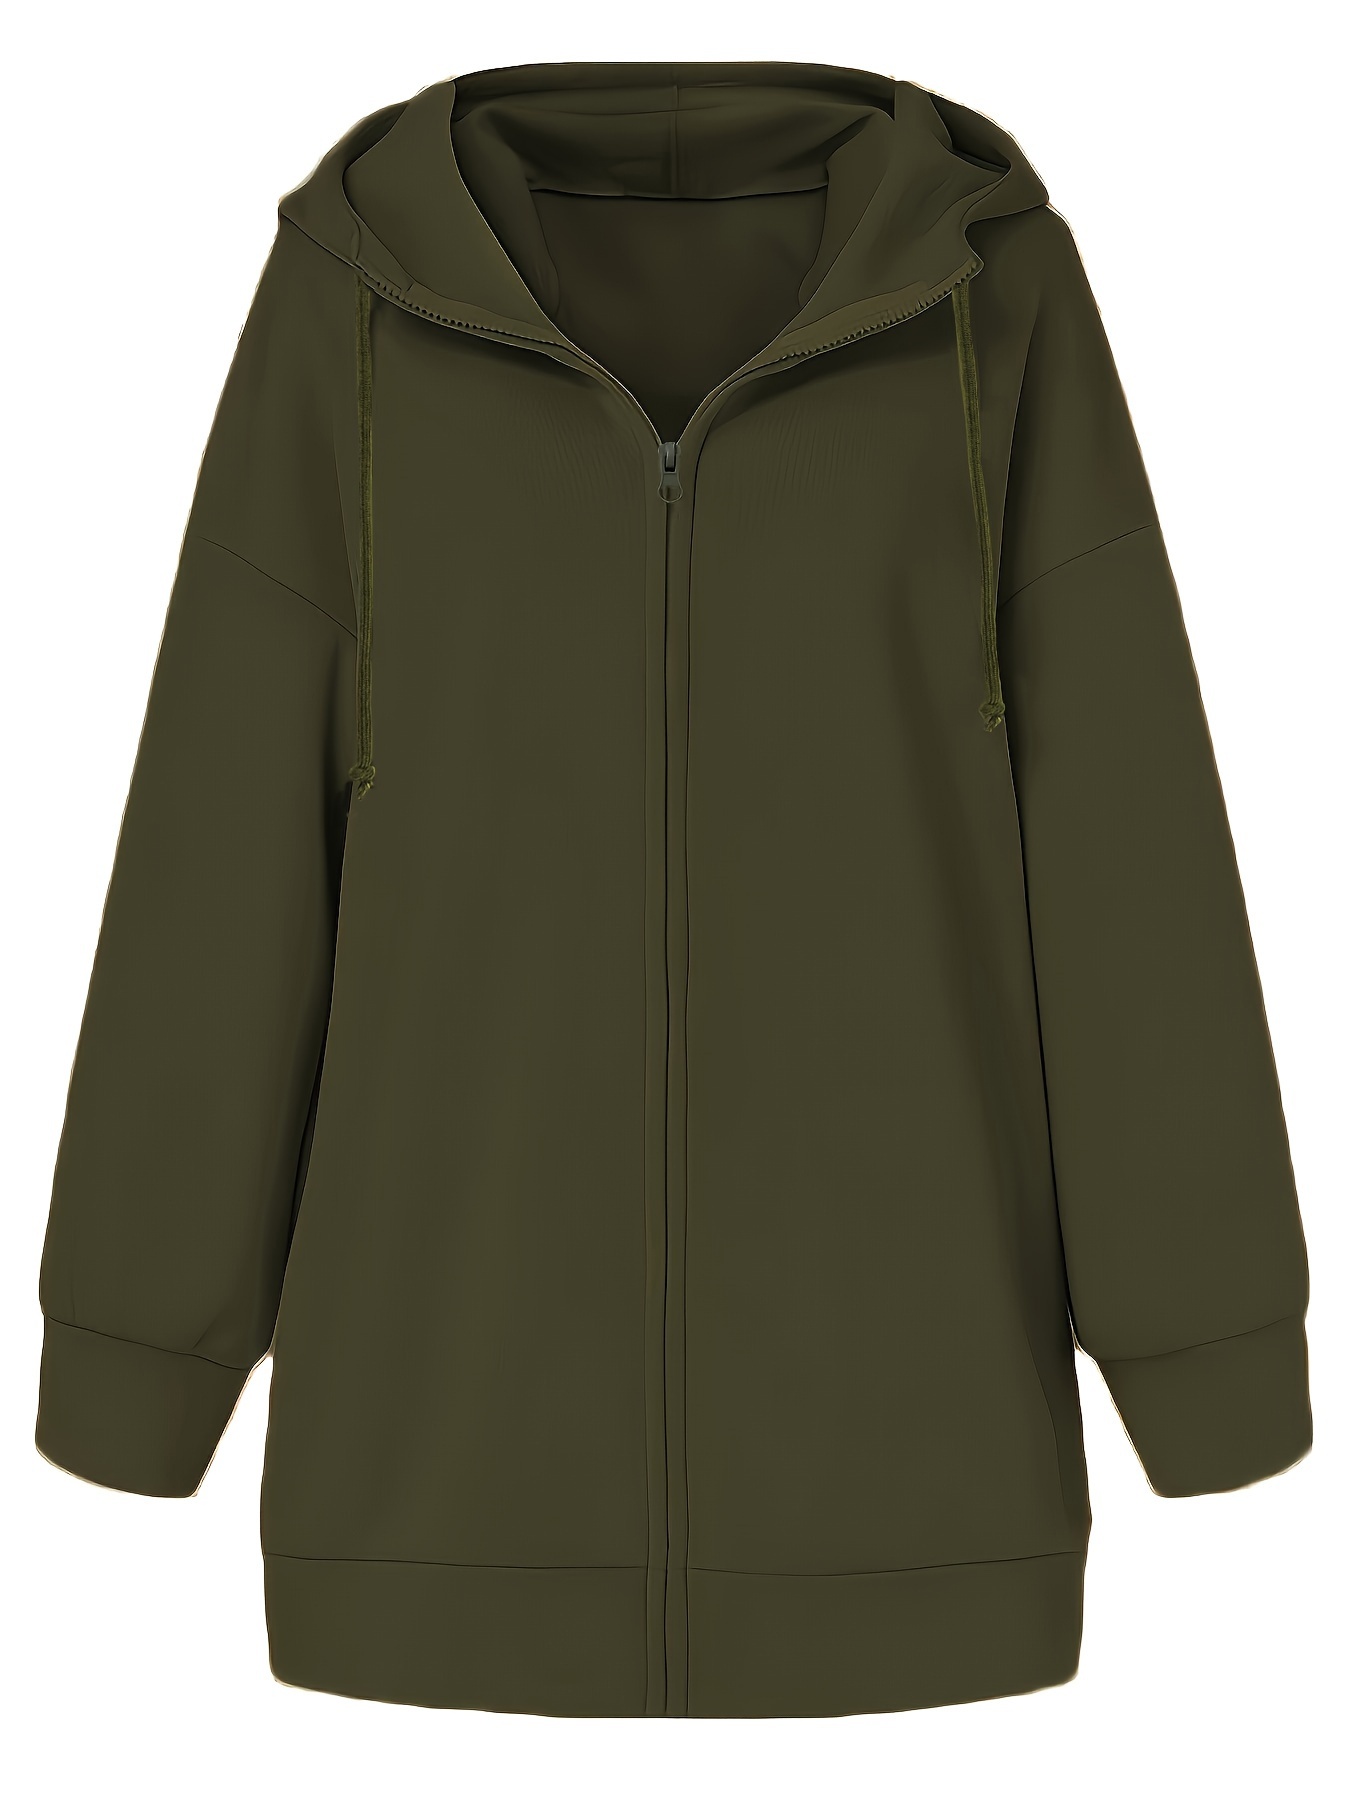 RQYYD Women Casual Full Zip Up Plus Size Hoodie Comfy Loose Solid Hooded  Sweatshirt Loose Long Sleeve Winter Jacket with Pockets (Army Green,3XL) 